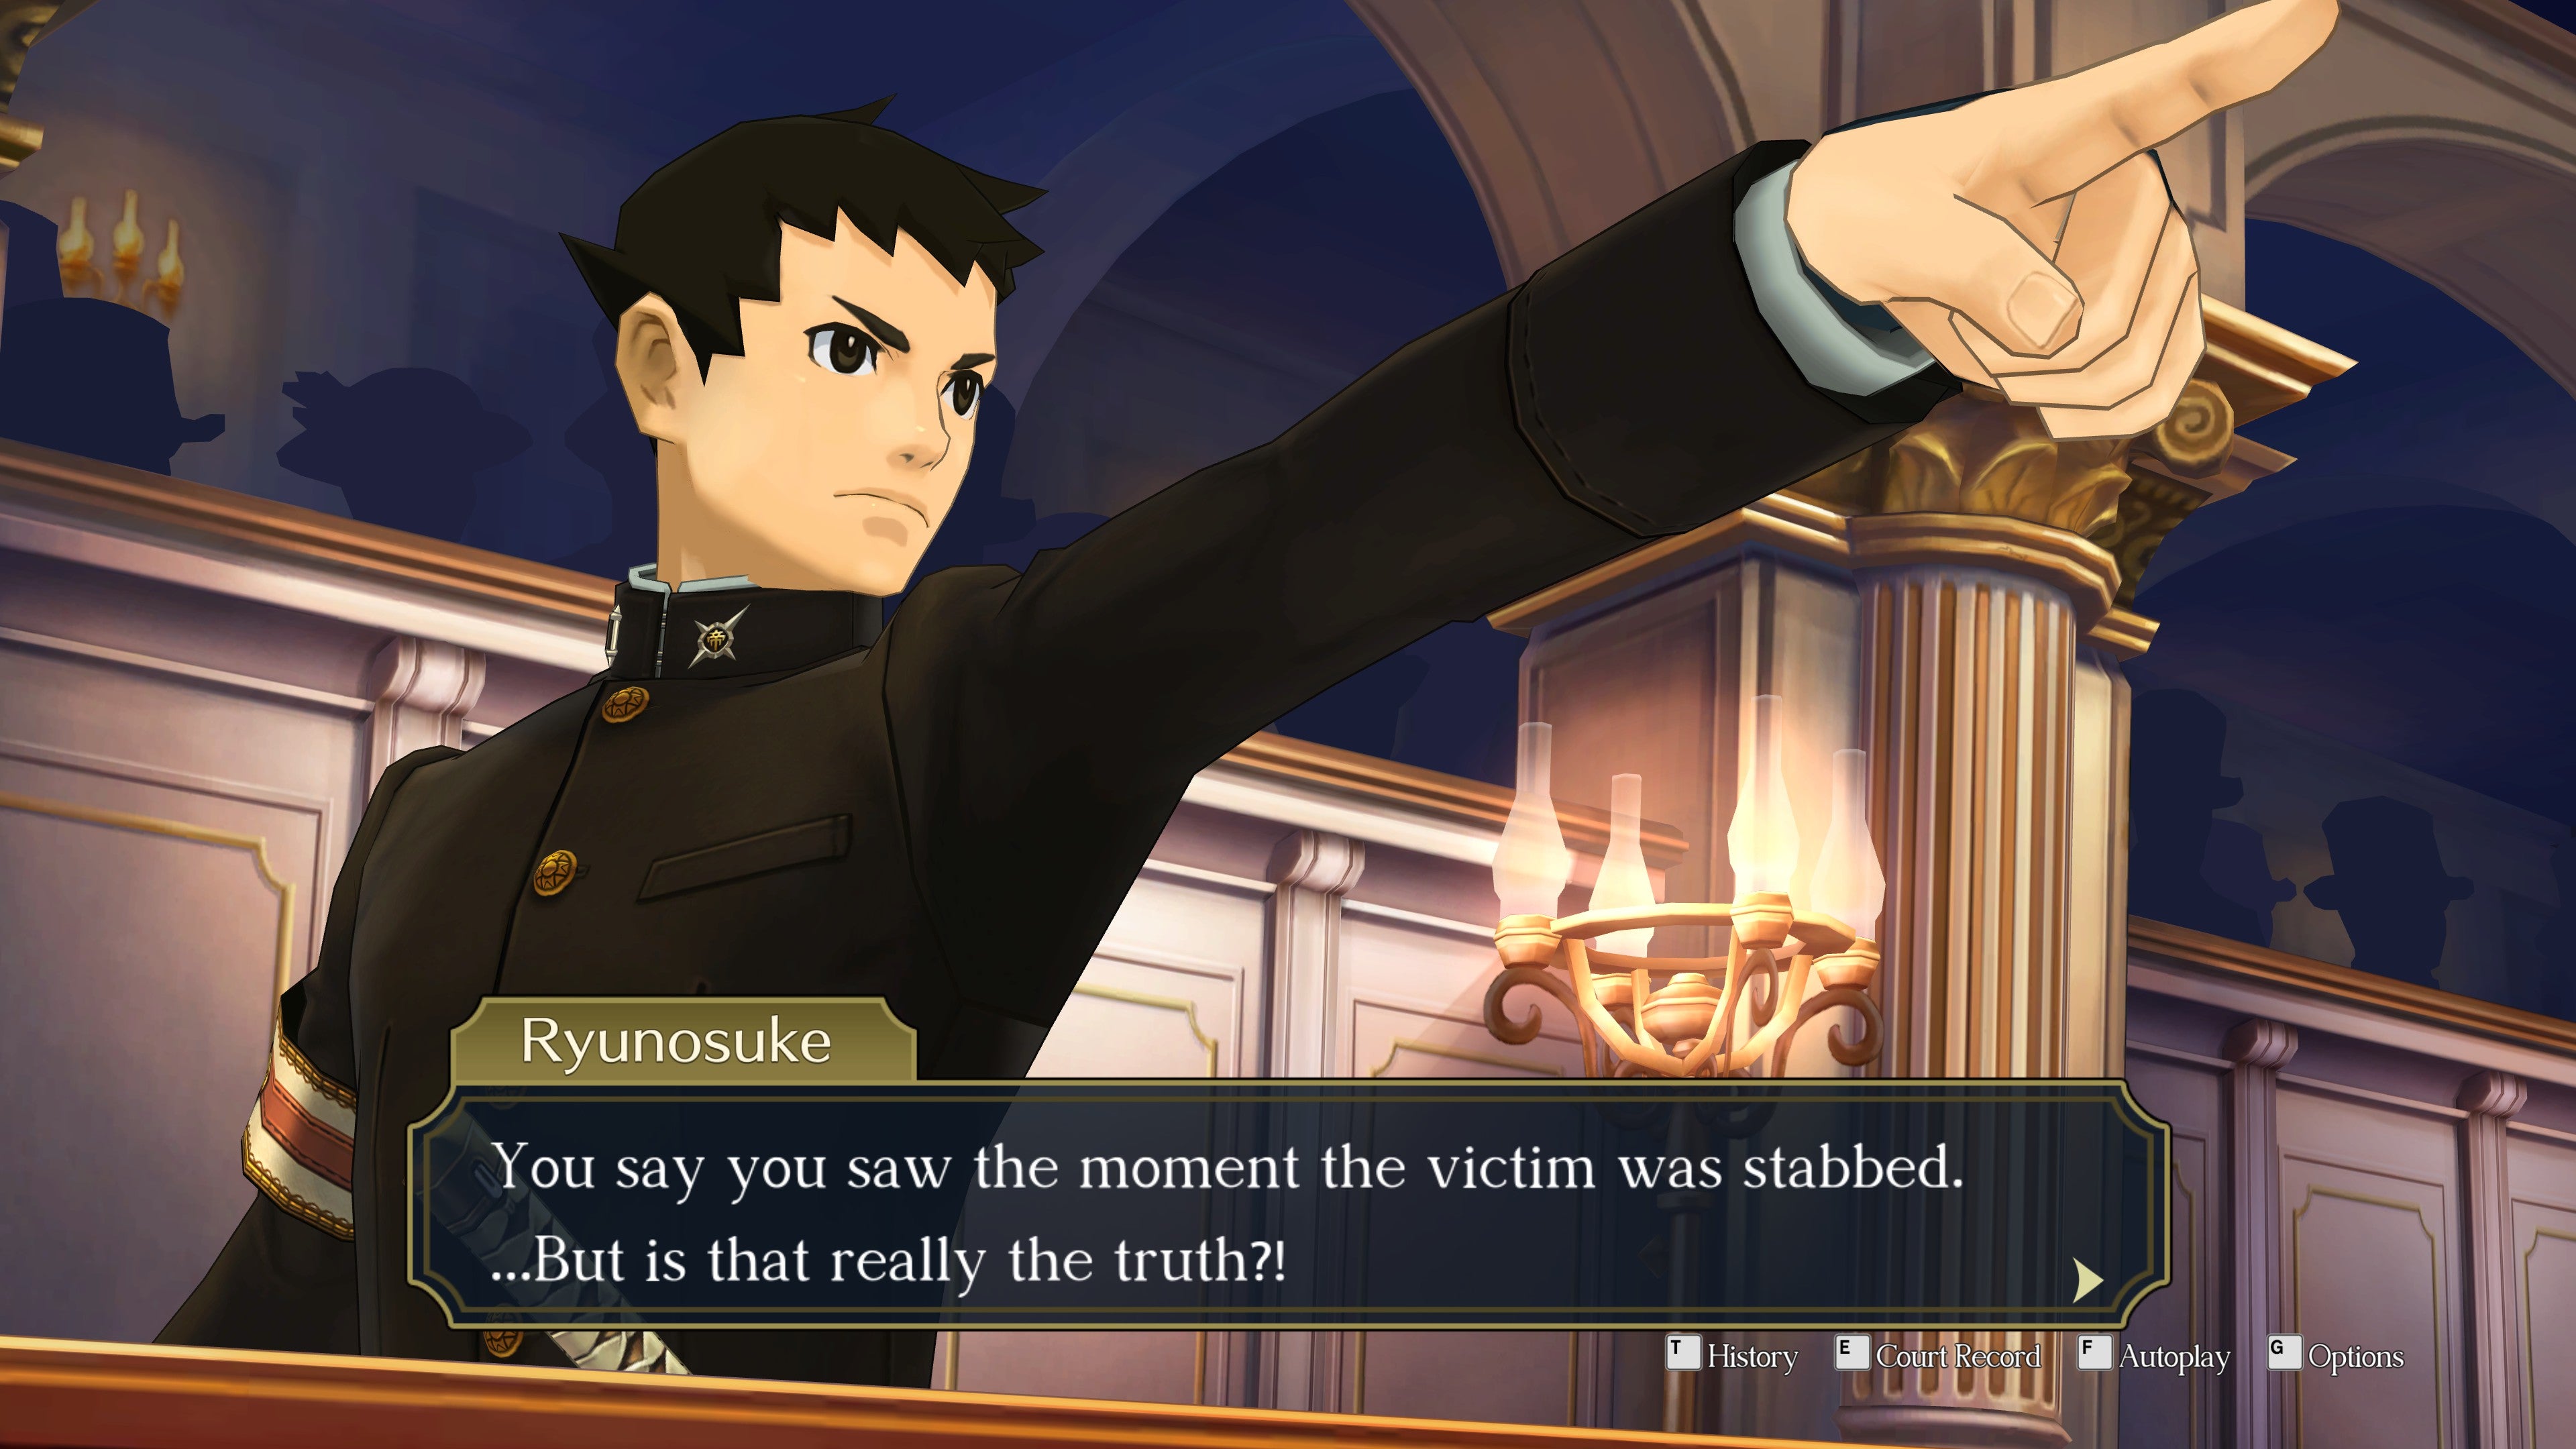 Ryunosuke pointing his finger at a witness in The Great Ace Attorney Chronicles